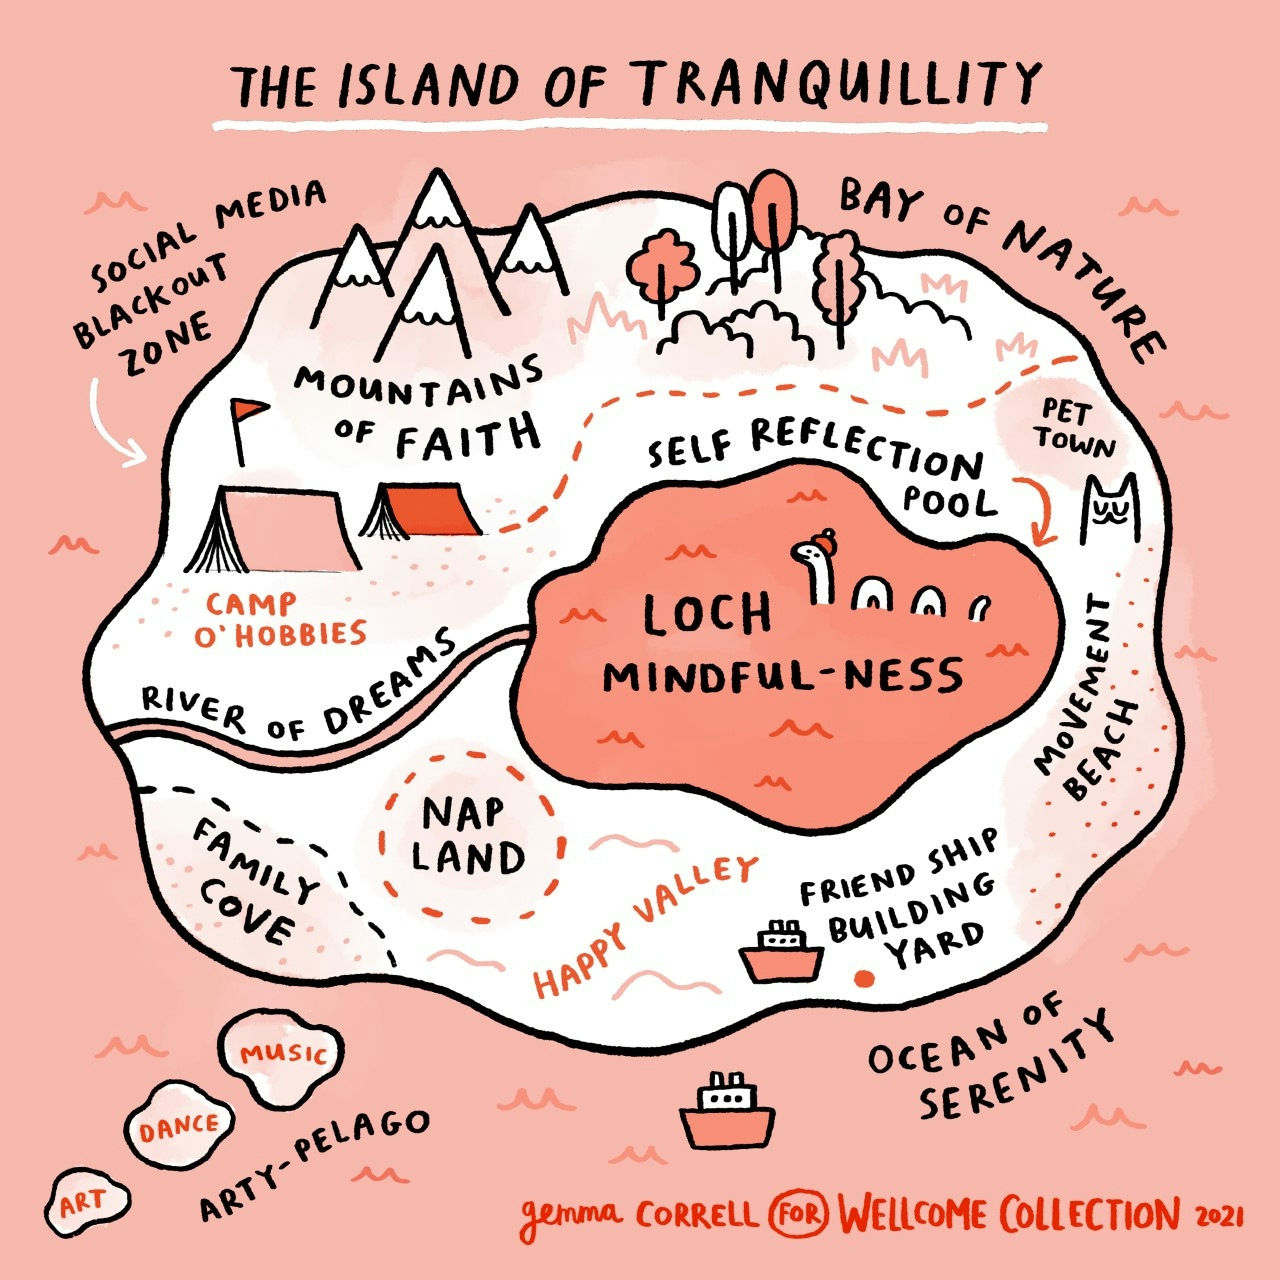 Title - “The Island of Tranquillity”

Image - an island surrounded by water.
On the island are drawn - from top left -
- Arrow pointing to “Social media blackout zone”
- mountains “Mountains of Faith”
- trees “Bay of Nature”
- tents shaped like books “Camp o’ Hobbies”
- river “river of dreams”
- lake with monster swimming in it “Loch Mindful-ness”
- arrow pointing to “self reflection pool”
- Cat head shape “Pet town”
- “movement beach”
- “family cove”
- “nap land”
- “happy valley”
- small ship “Friend ship building yard”
- 3 small islands “arty-pelago” - the islands are labeled “music” “dance” and “art”
- small ship “ocean of serenity”